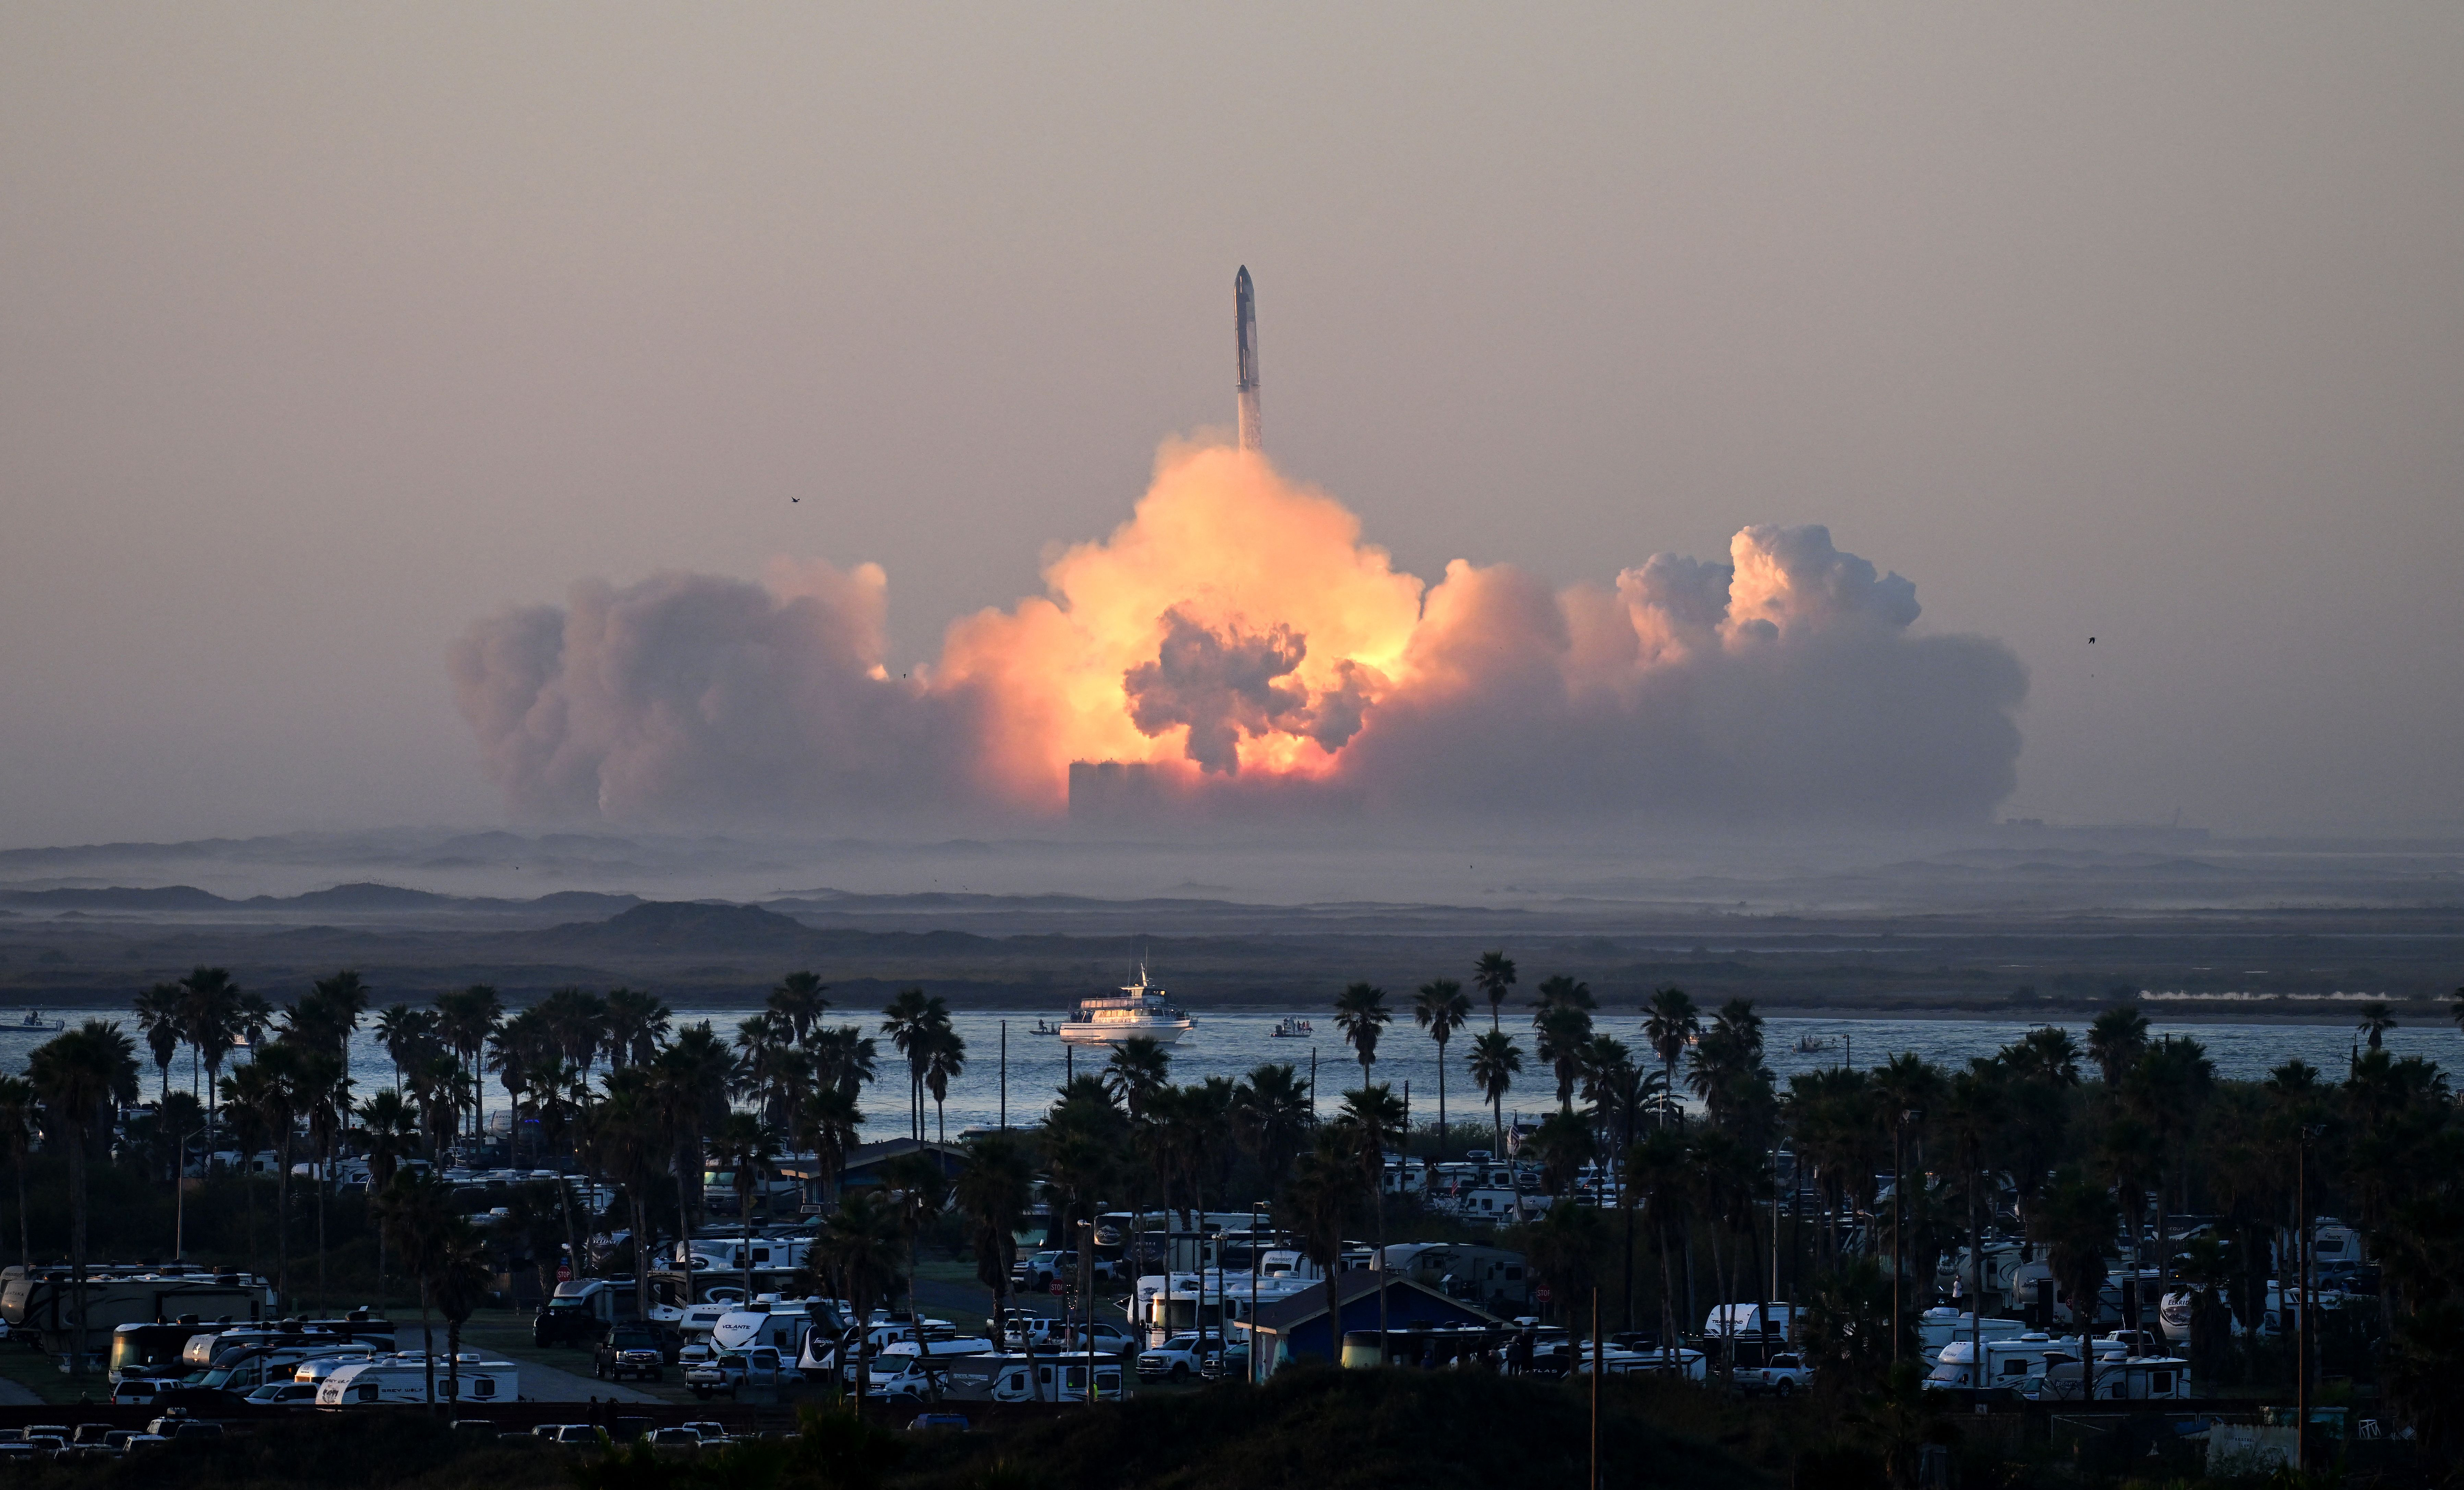 SpaceX's Starship launches from Starbase during its second test flight in Boca Chica, Texas, on Saturday, November 18.